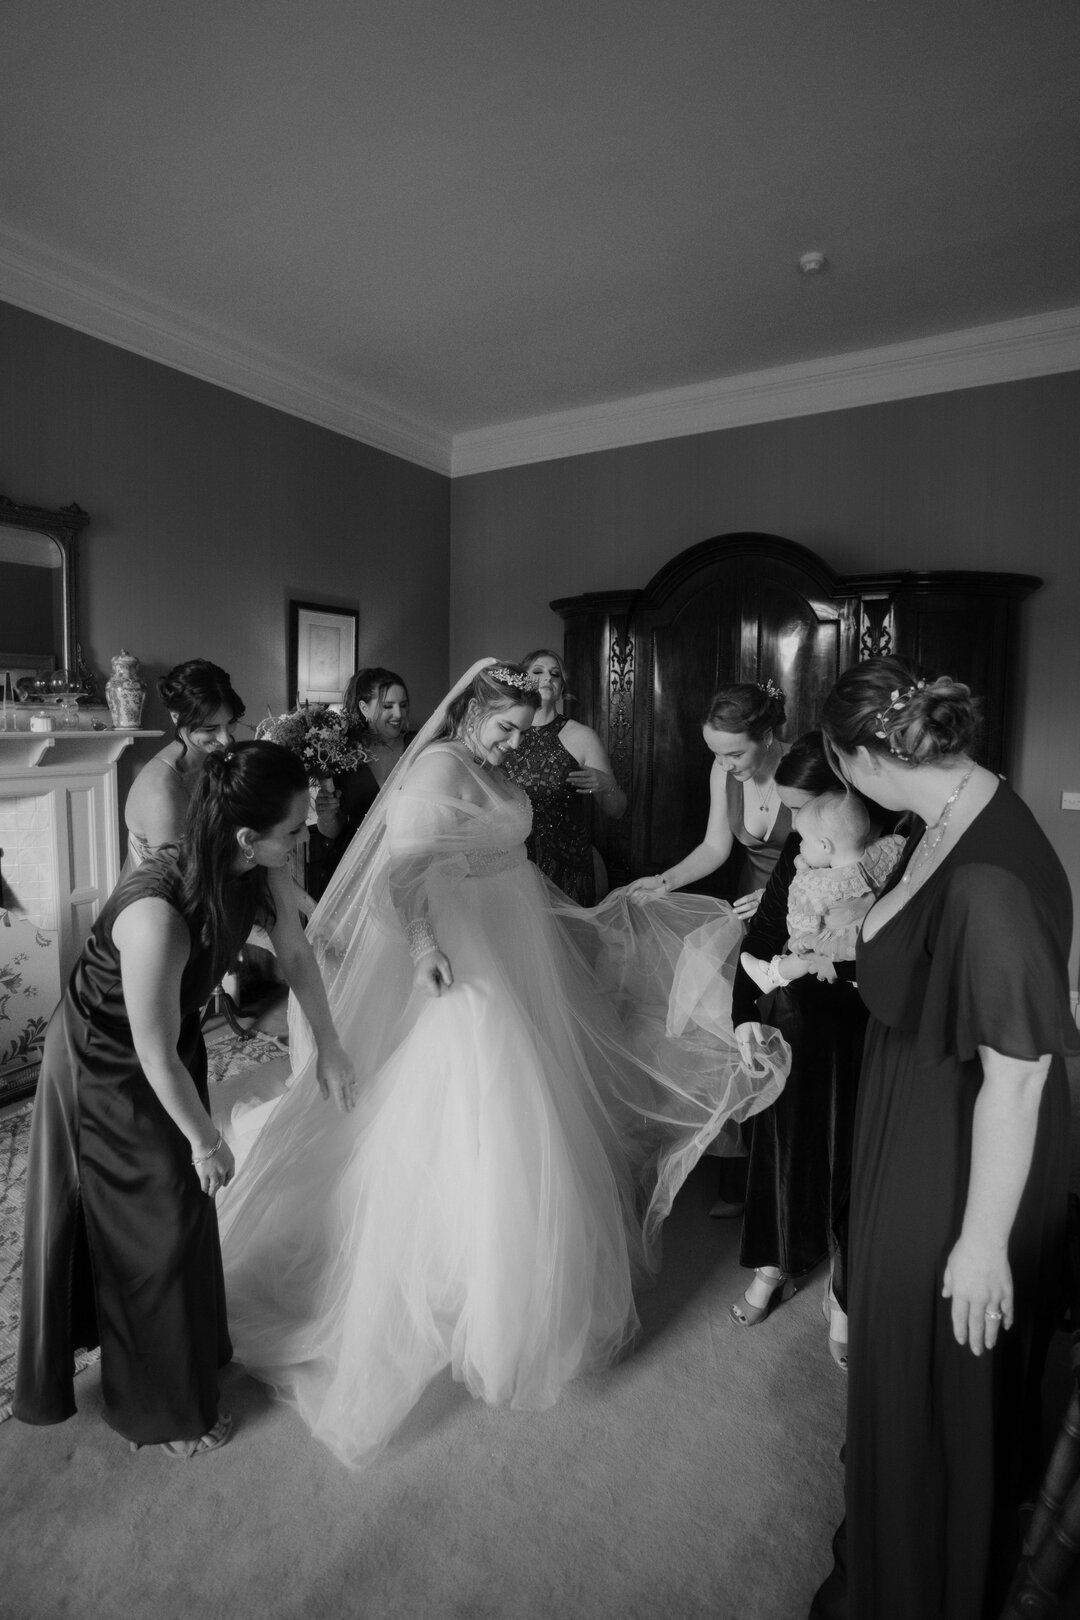 Isabelle's bridal squad adding the final touches with love and laughter. Honored to capture these priceless moments of beauty and camaraderie